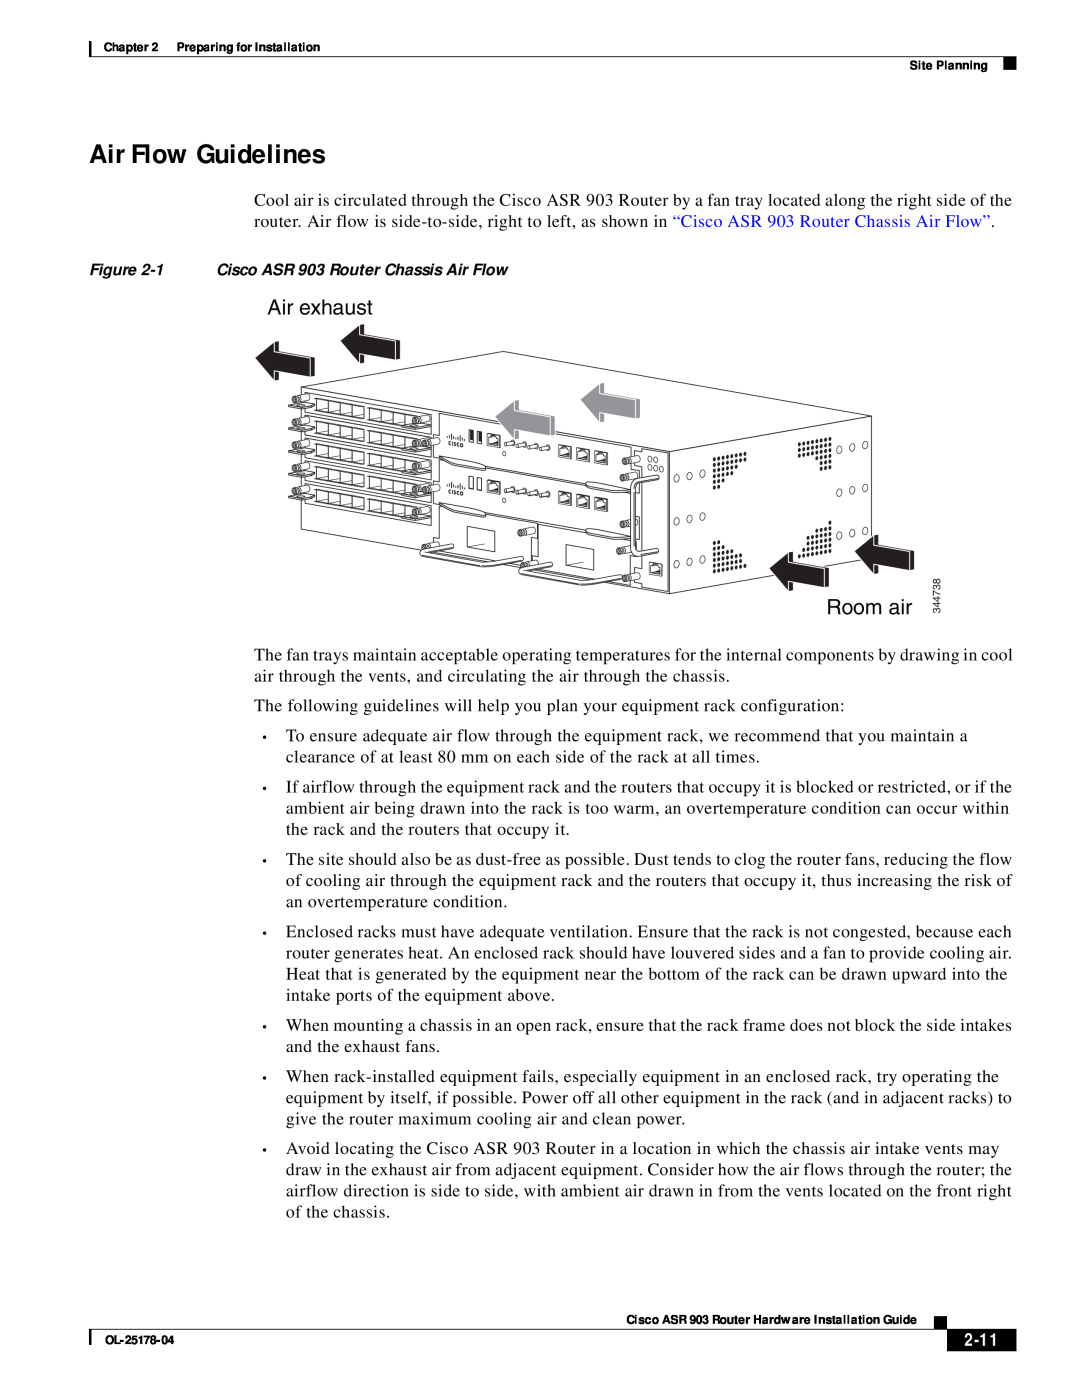 Cisco Systems ASR 903 manual Air Flow Guidelines, 2-11, Air exhaust, Room air 